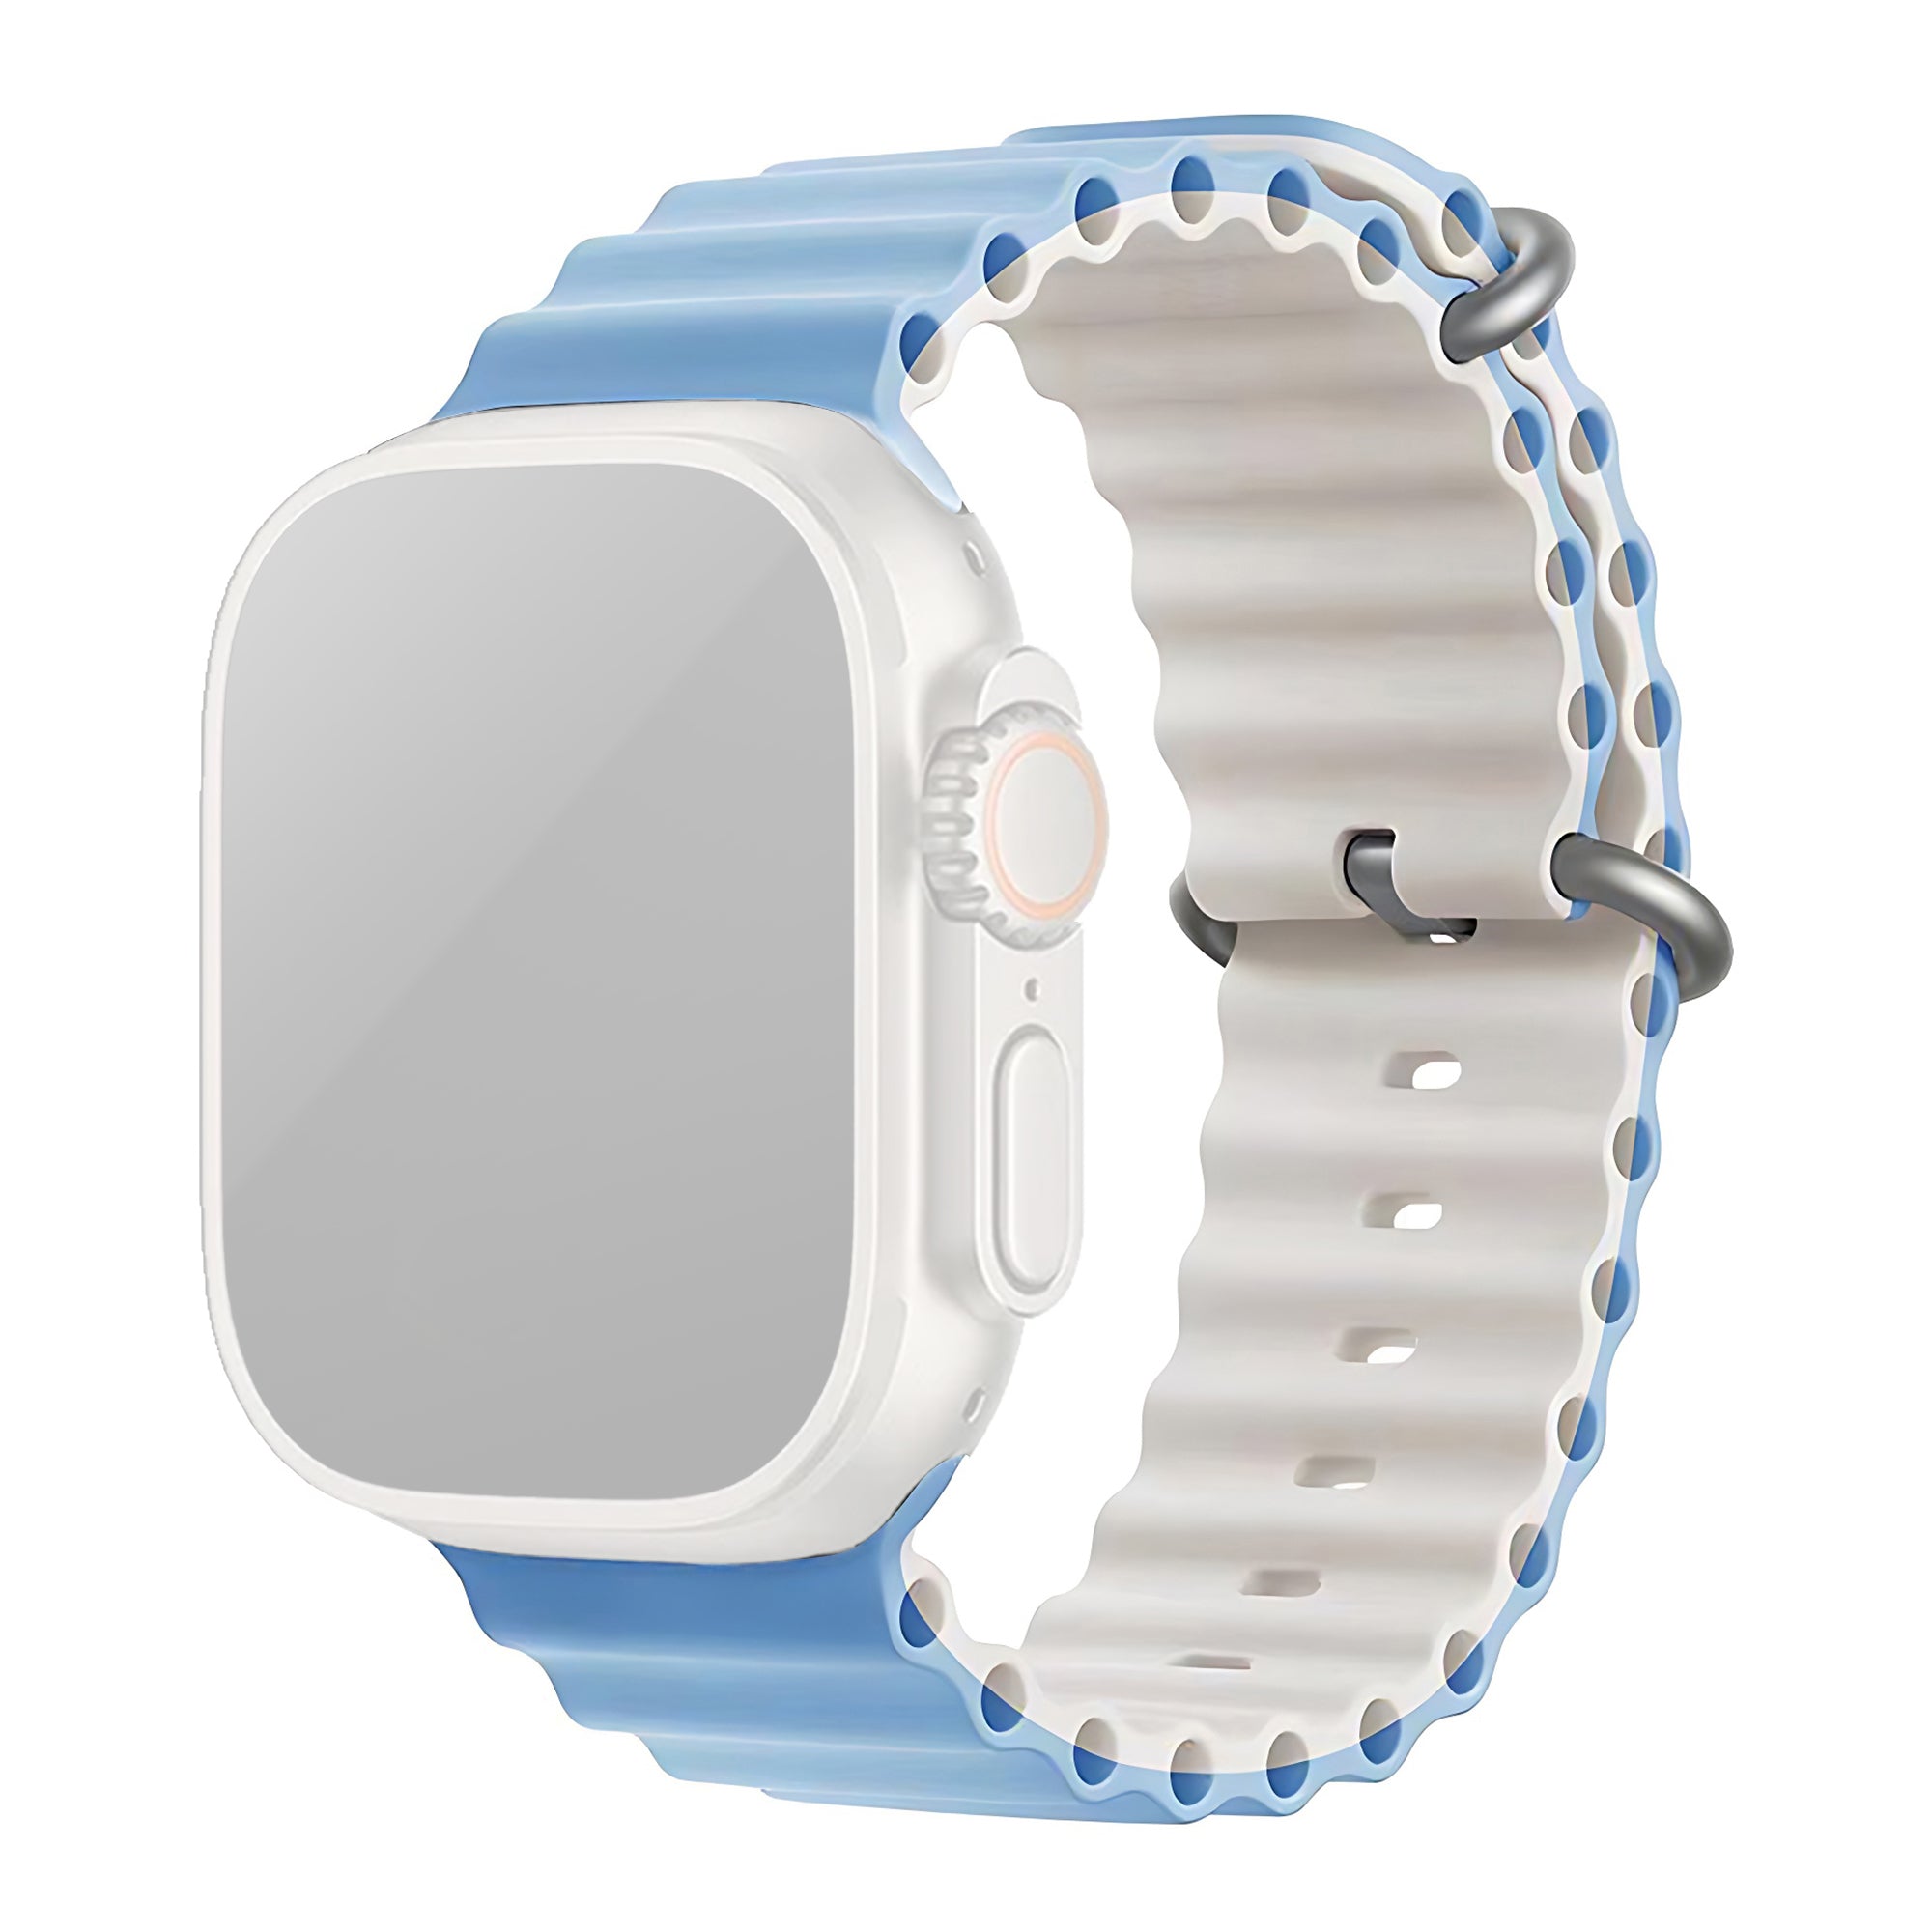 Silicone Ocean Loop Strap for - Apple Watch 40mm - Blue & Gray